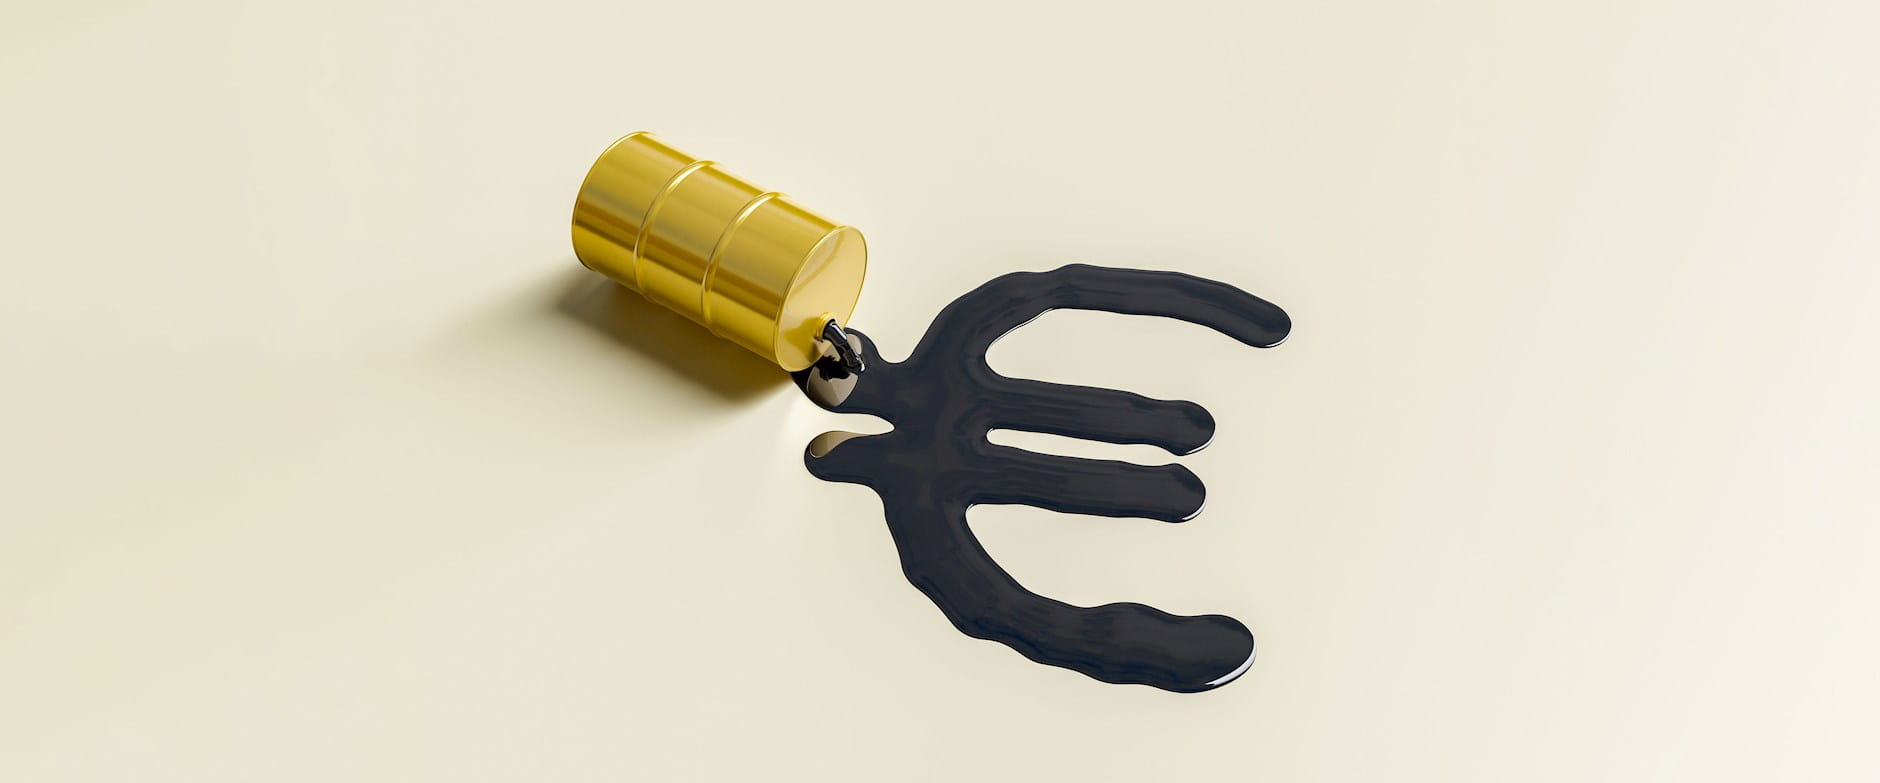 Oil spilling from a barrel and pooling into the shape of the euro currency symbol